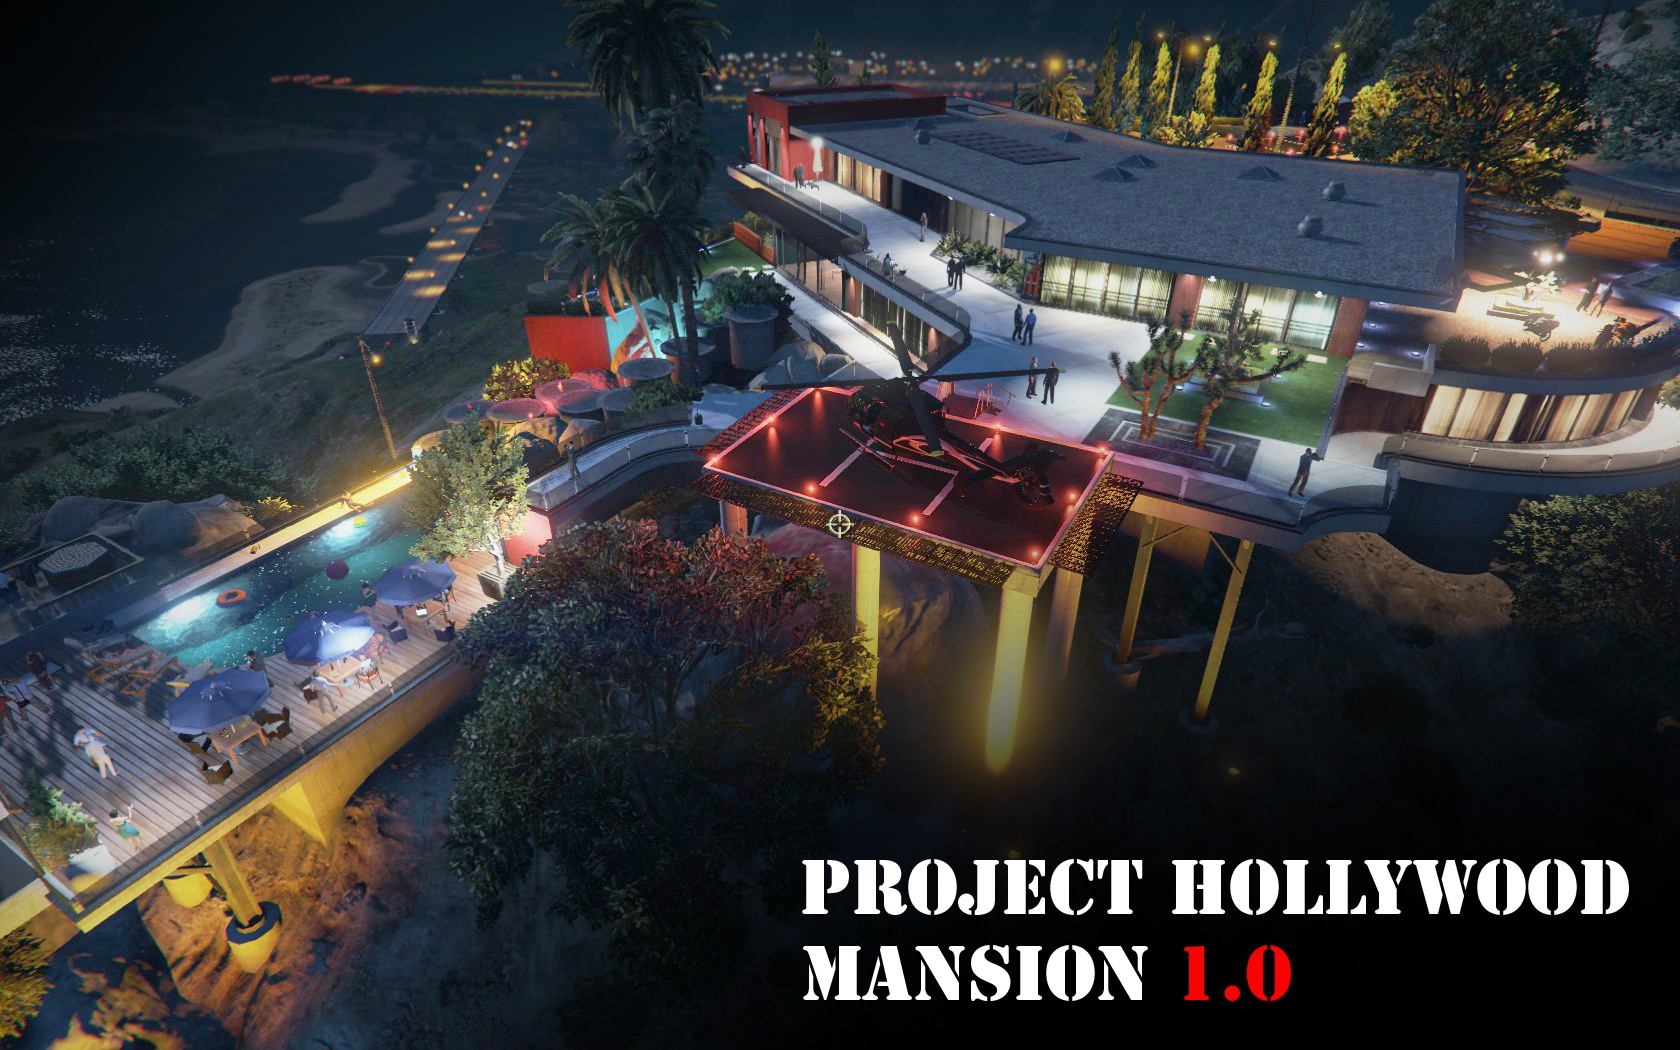 Project Hollywood Mansion 1.0